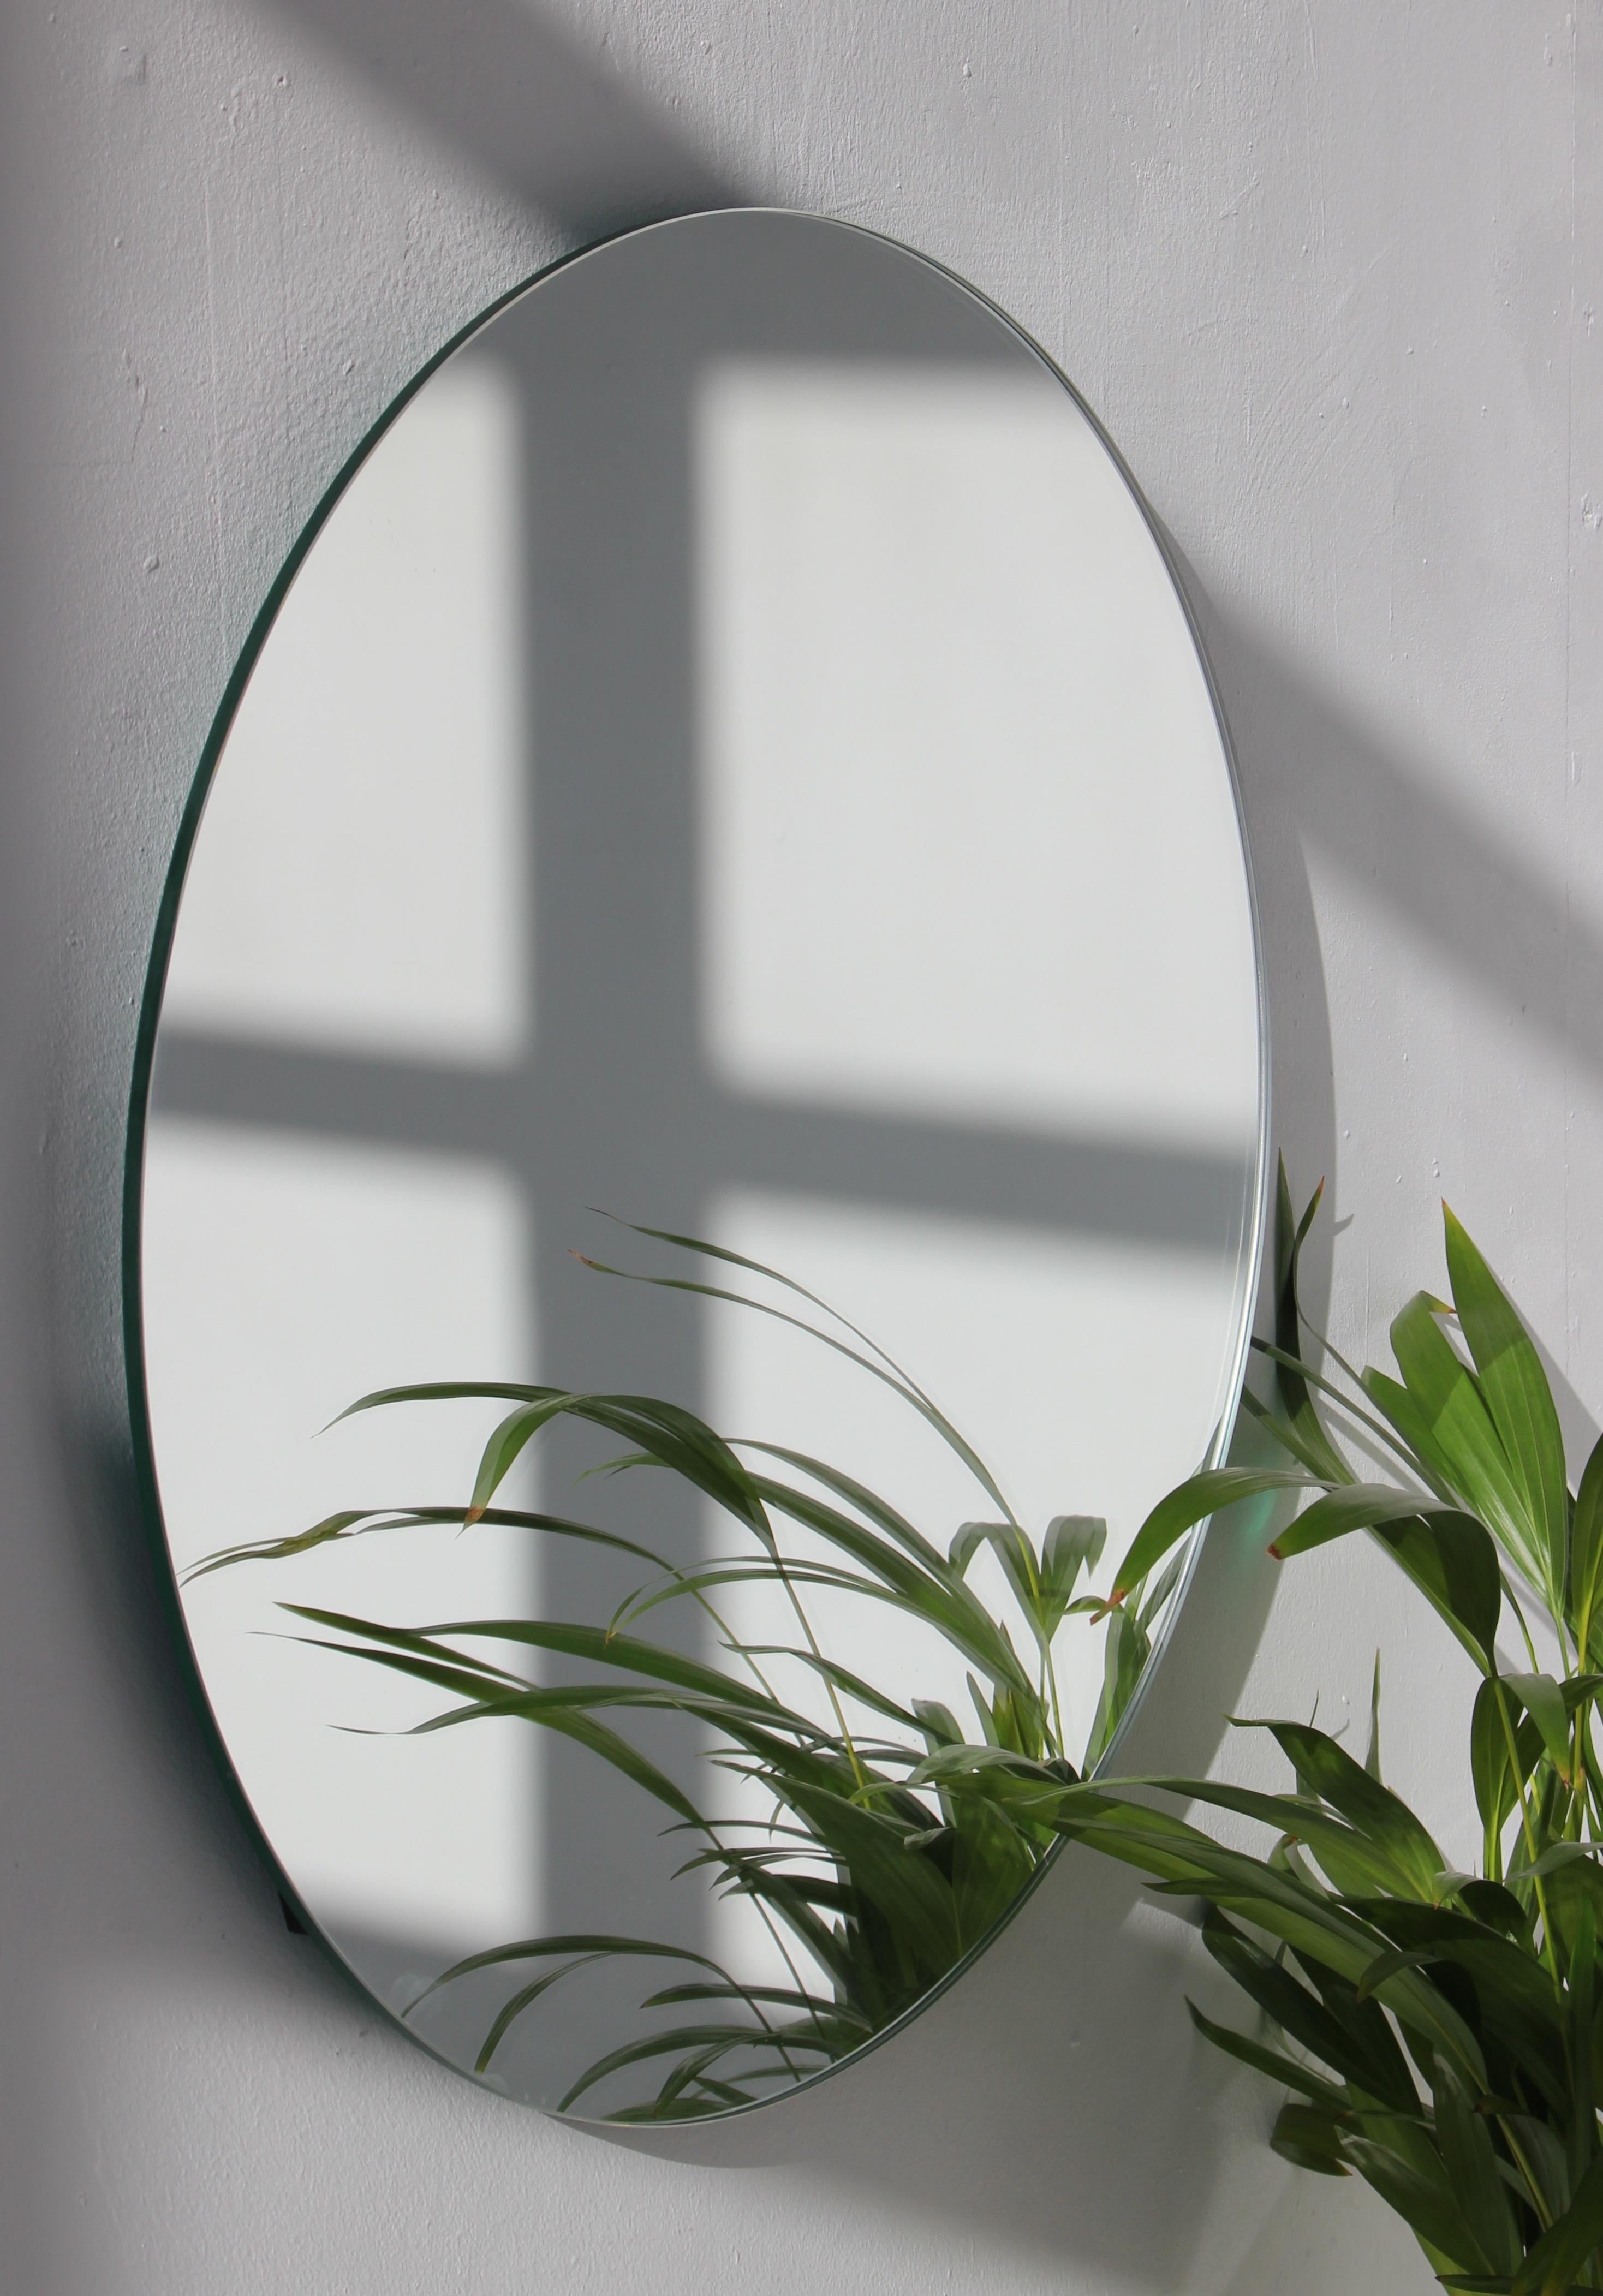 Minimalist round frameless mirror with a floating effect. Quality design that ensures the mirror sits perfectly parallel to the wall. Designed and made in London, UK.

Fitted with professional plates not visible once installed for an easy and safe